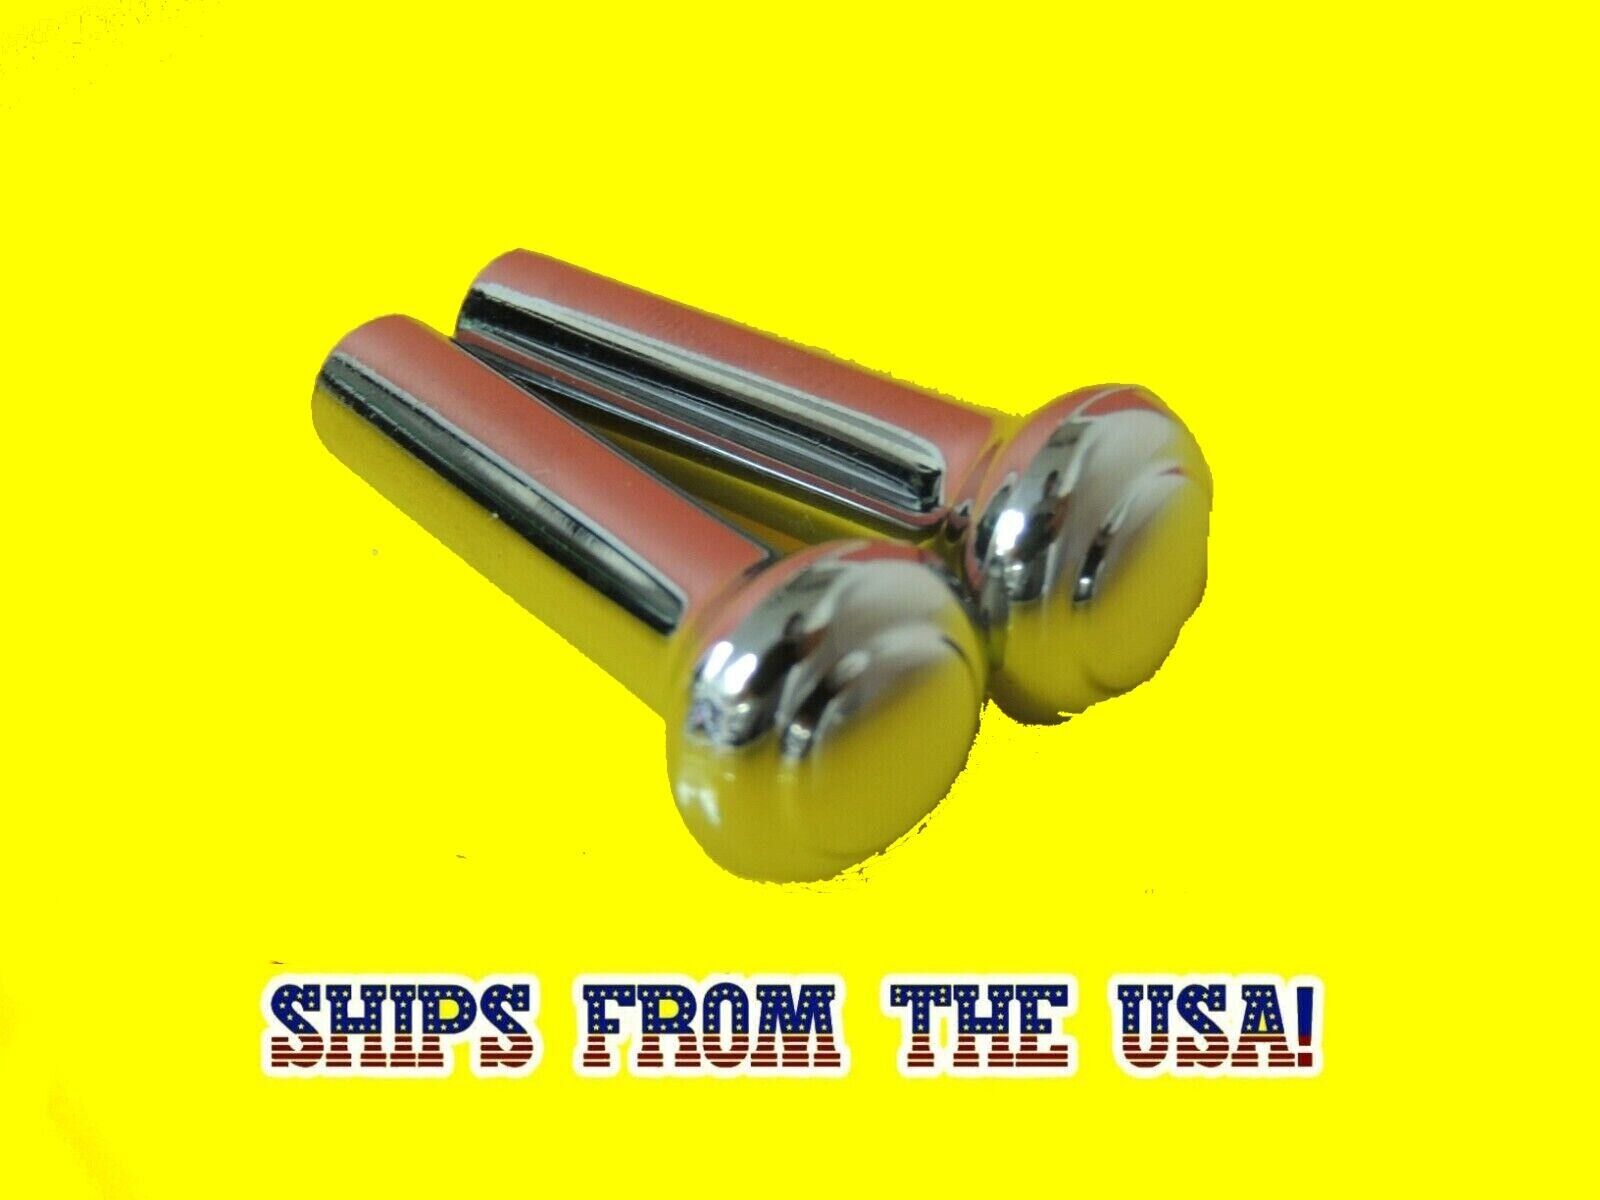 Chrome Door Lock Knobs For 1968 1972 68 72 Ford Truck Mustang Torino More Round